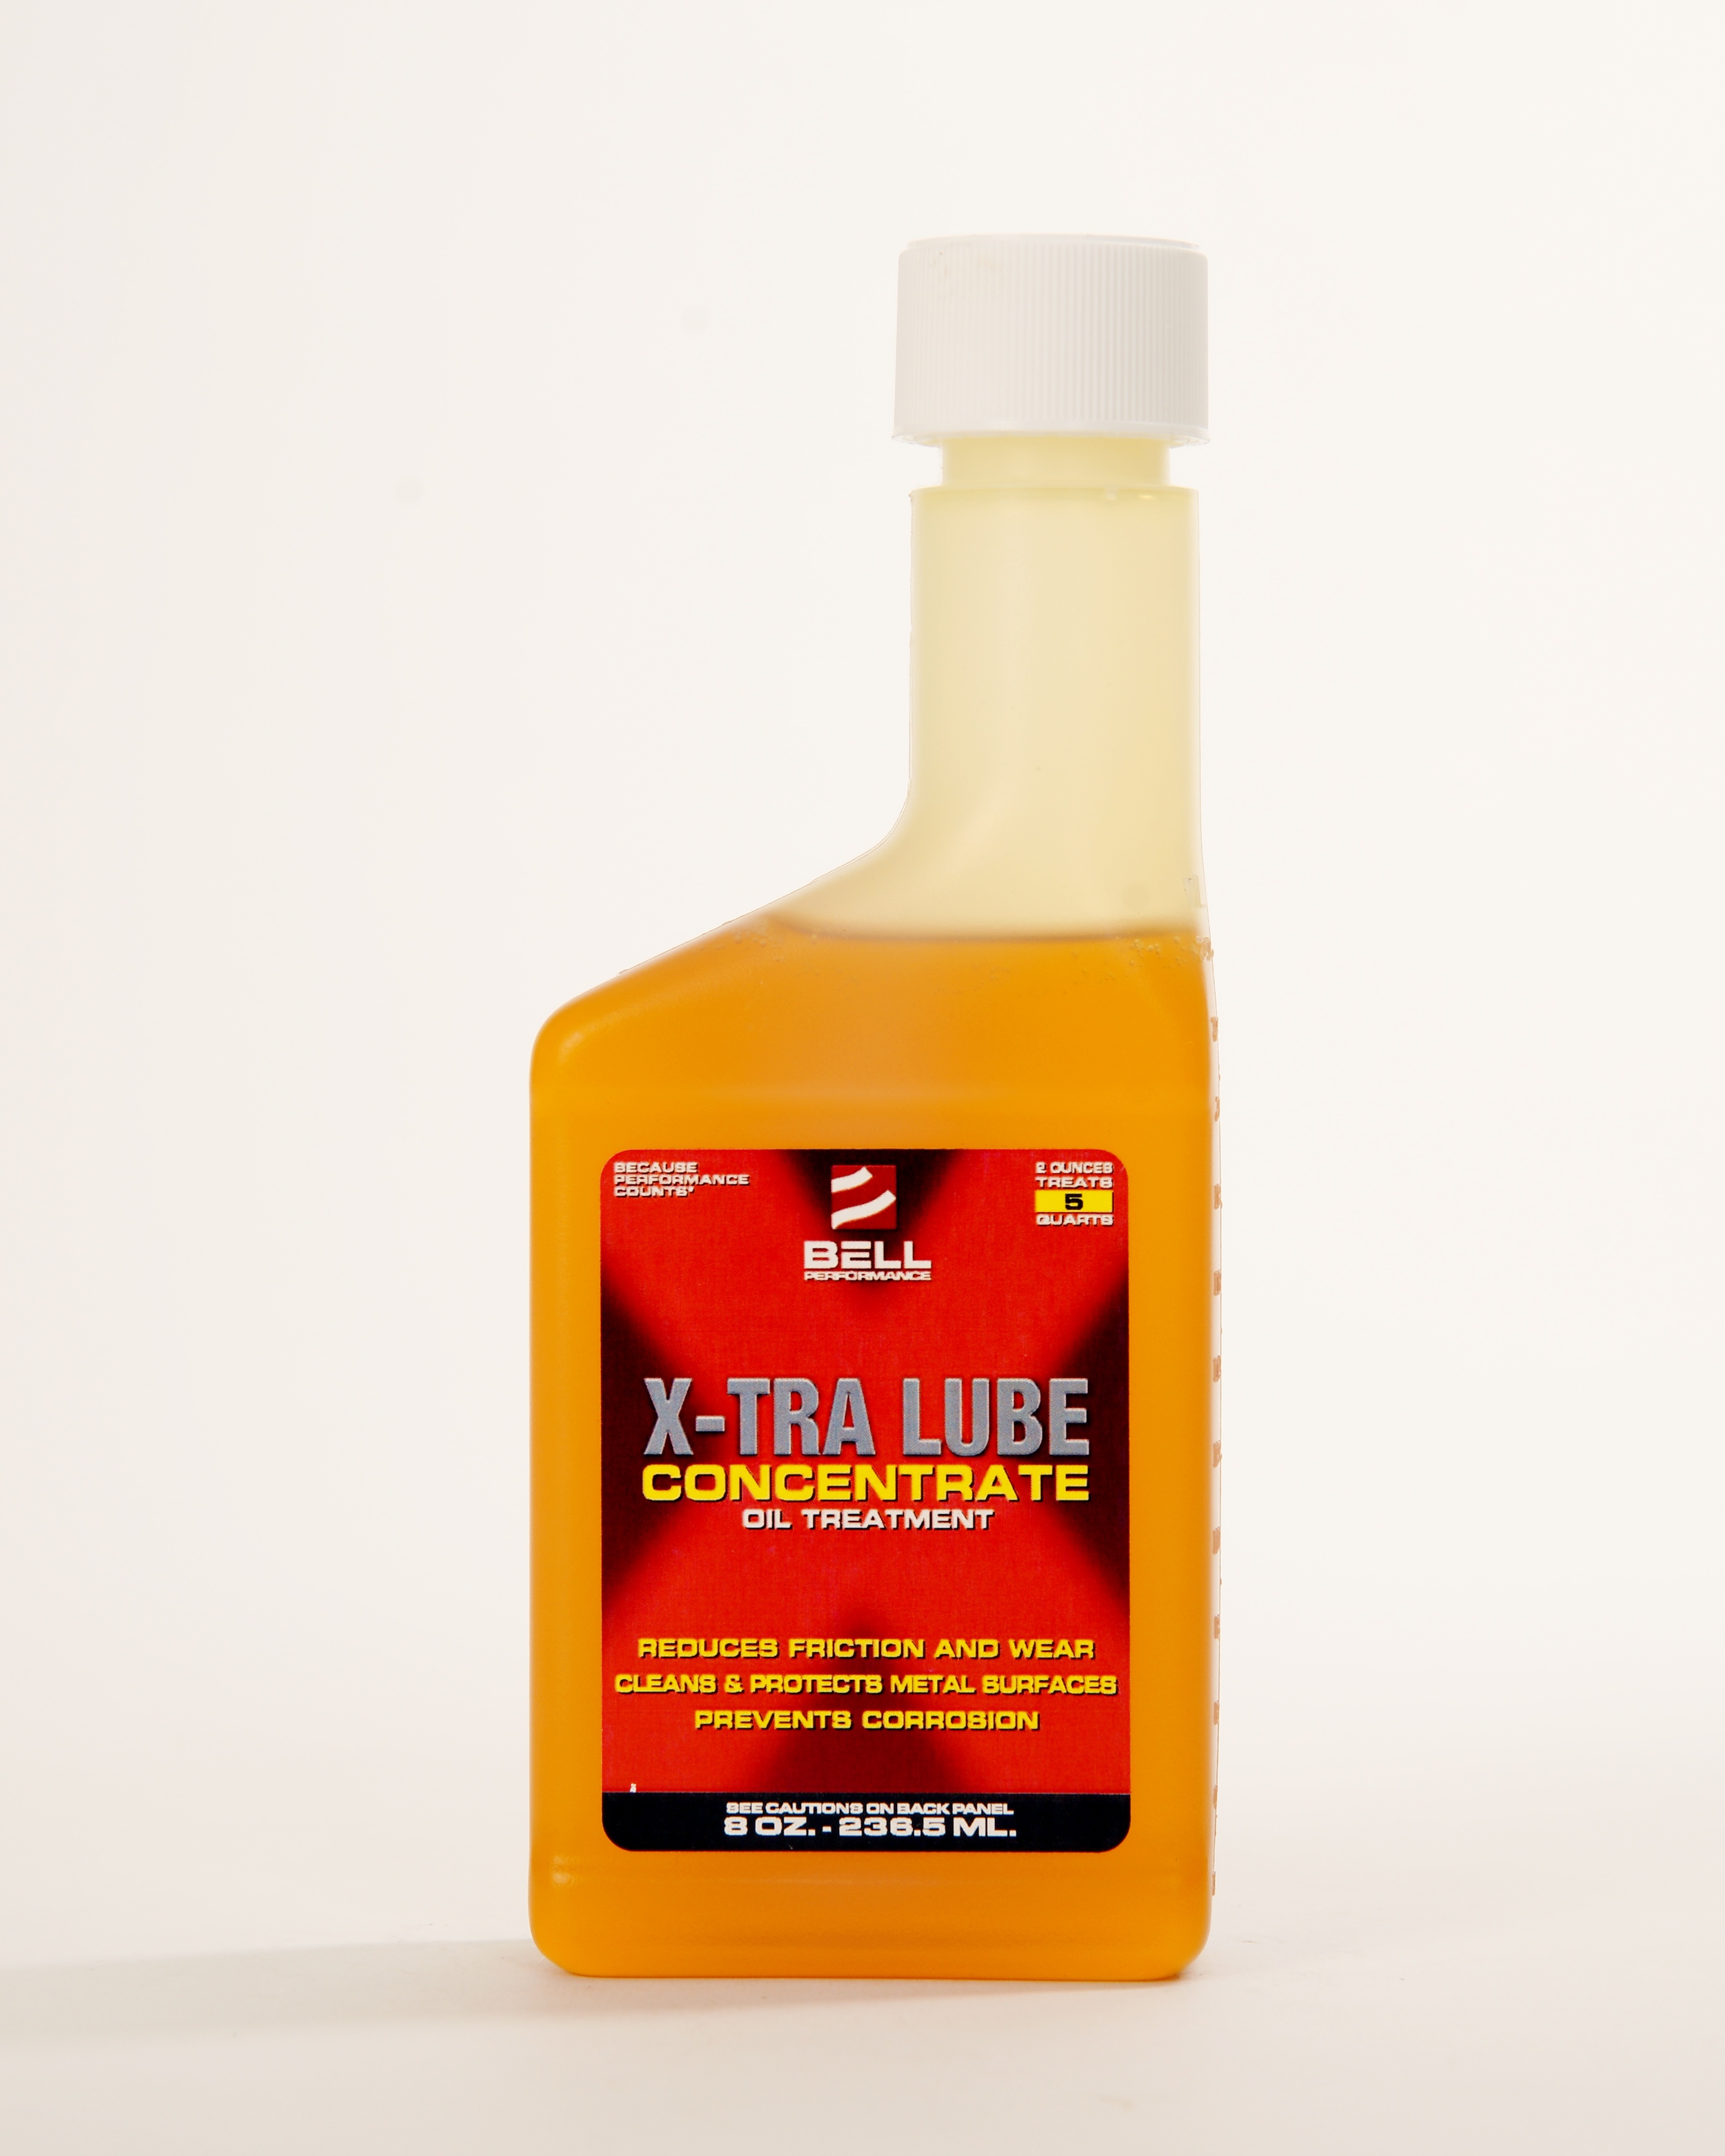 X-tra Lube Oil Treatment helps muscle cars and motorcycles